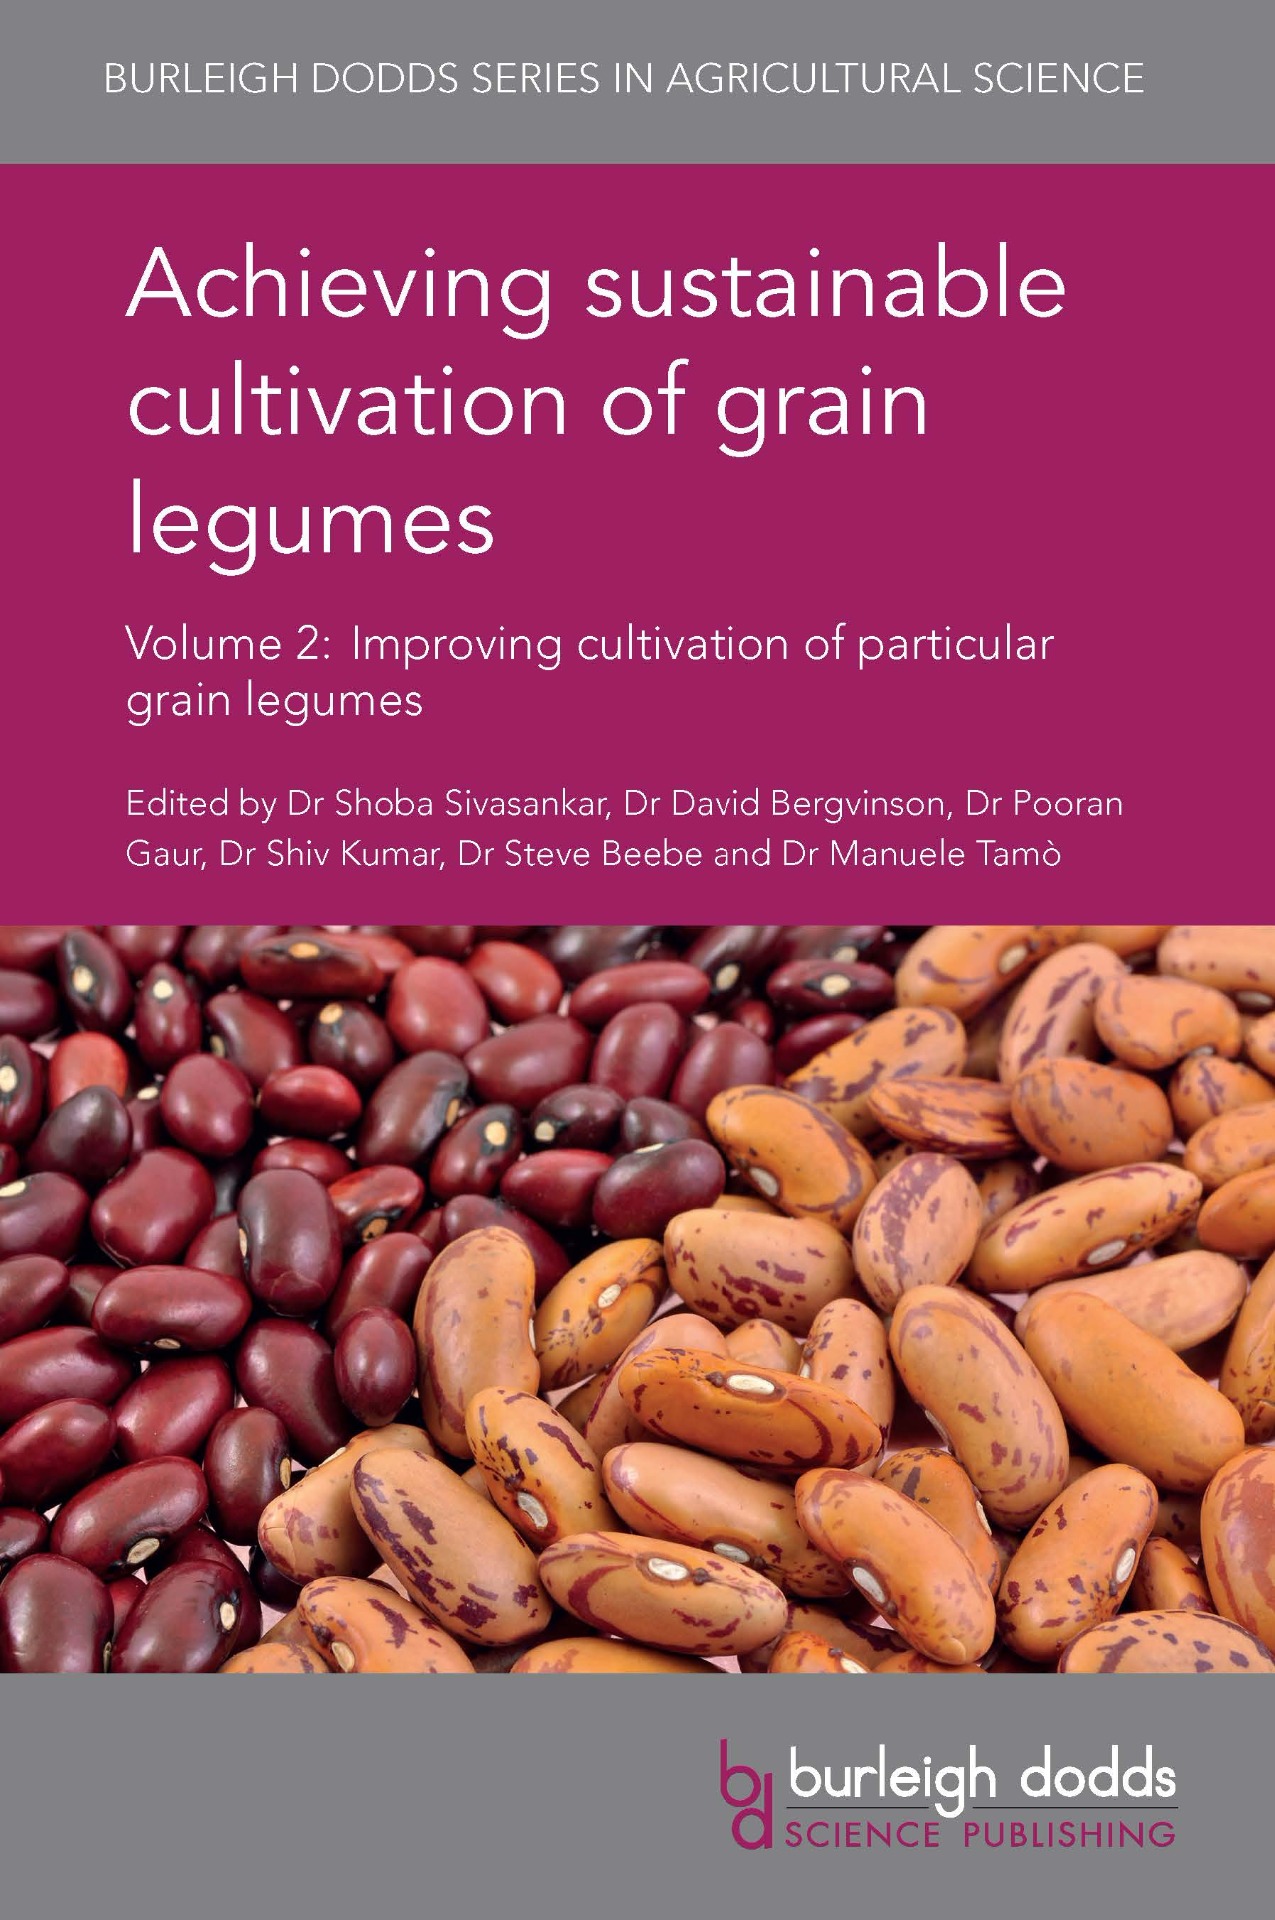 Achieving sustainable cultivation of grain legumes Volume 2